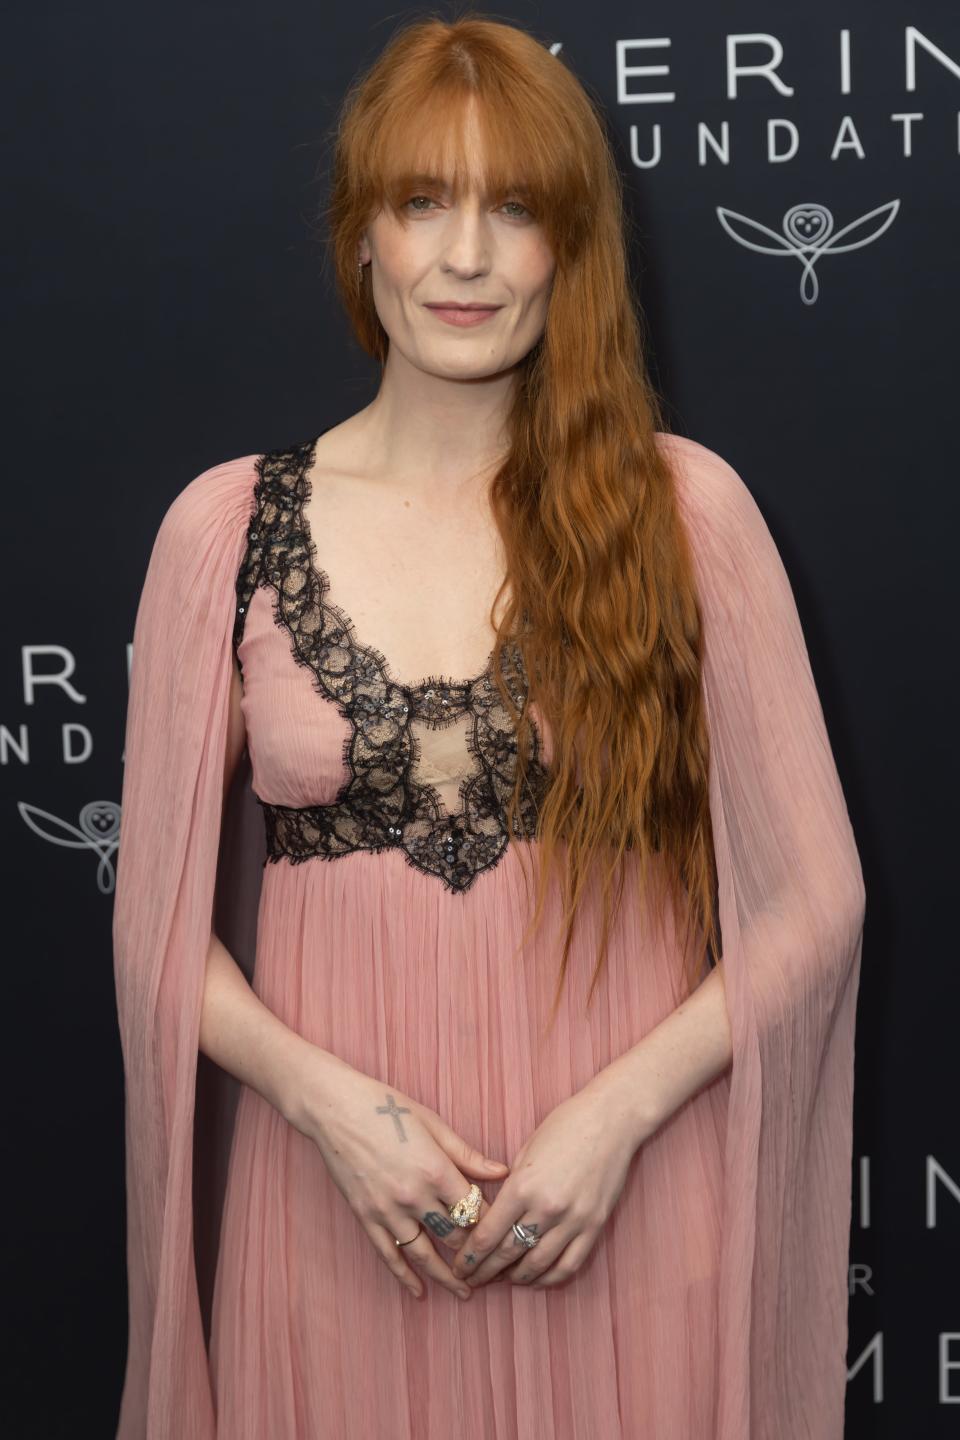 Florence Welch in a dress with lace details smiles on the red carpet